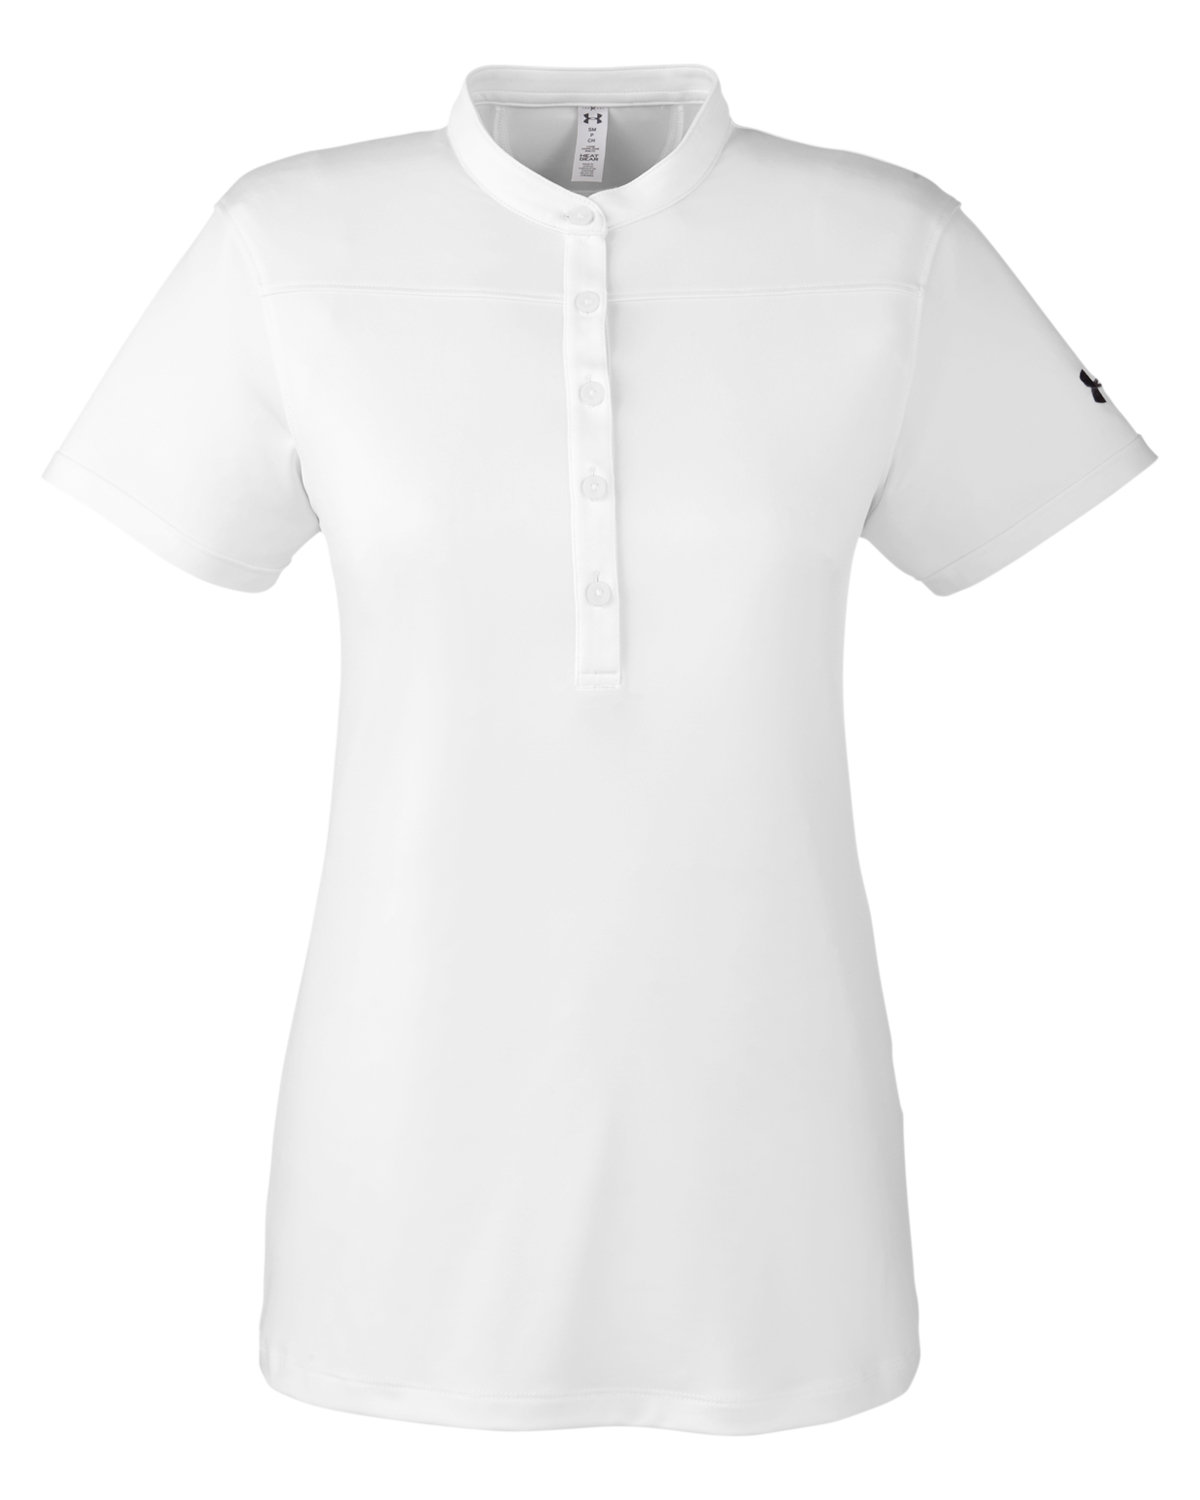 Picture of Under Armour SuperSale Women's Corporate Performance Polo 2.0